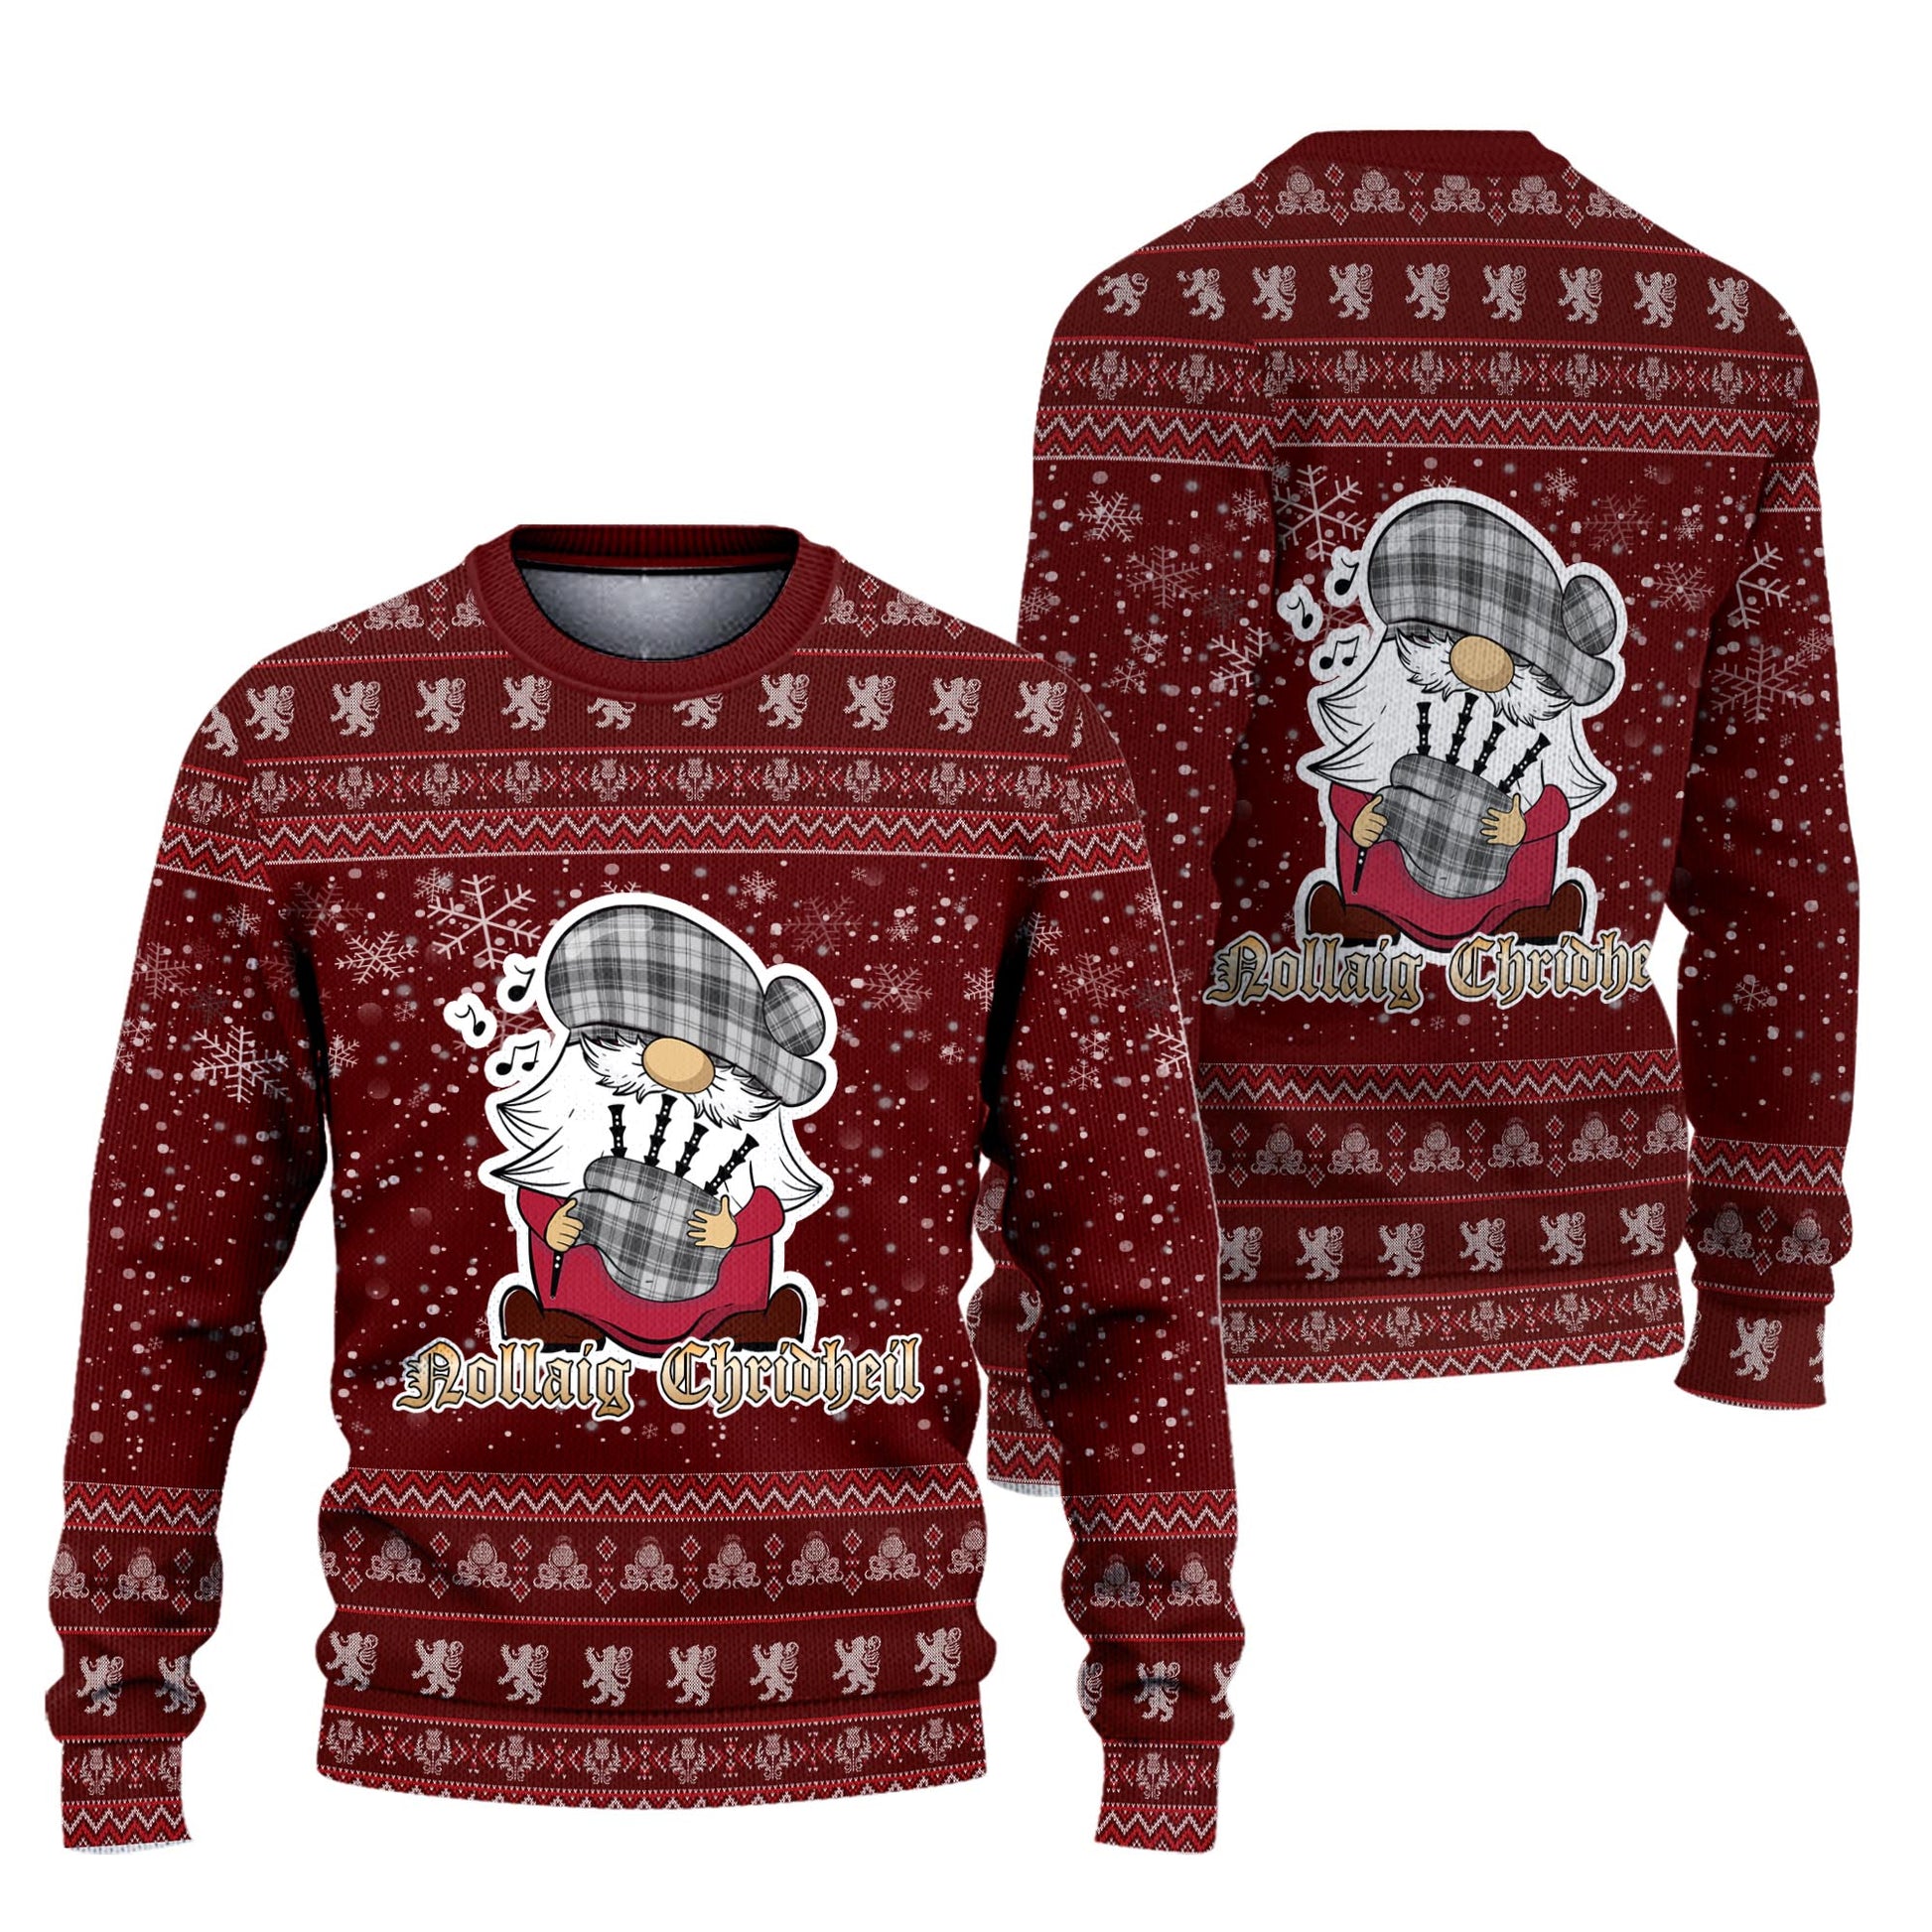 Glen Clan Christmas Family Knitted Sweater with Funny Gnome Playing Bagpipes Unisex Red - Tartanvibesclothing